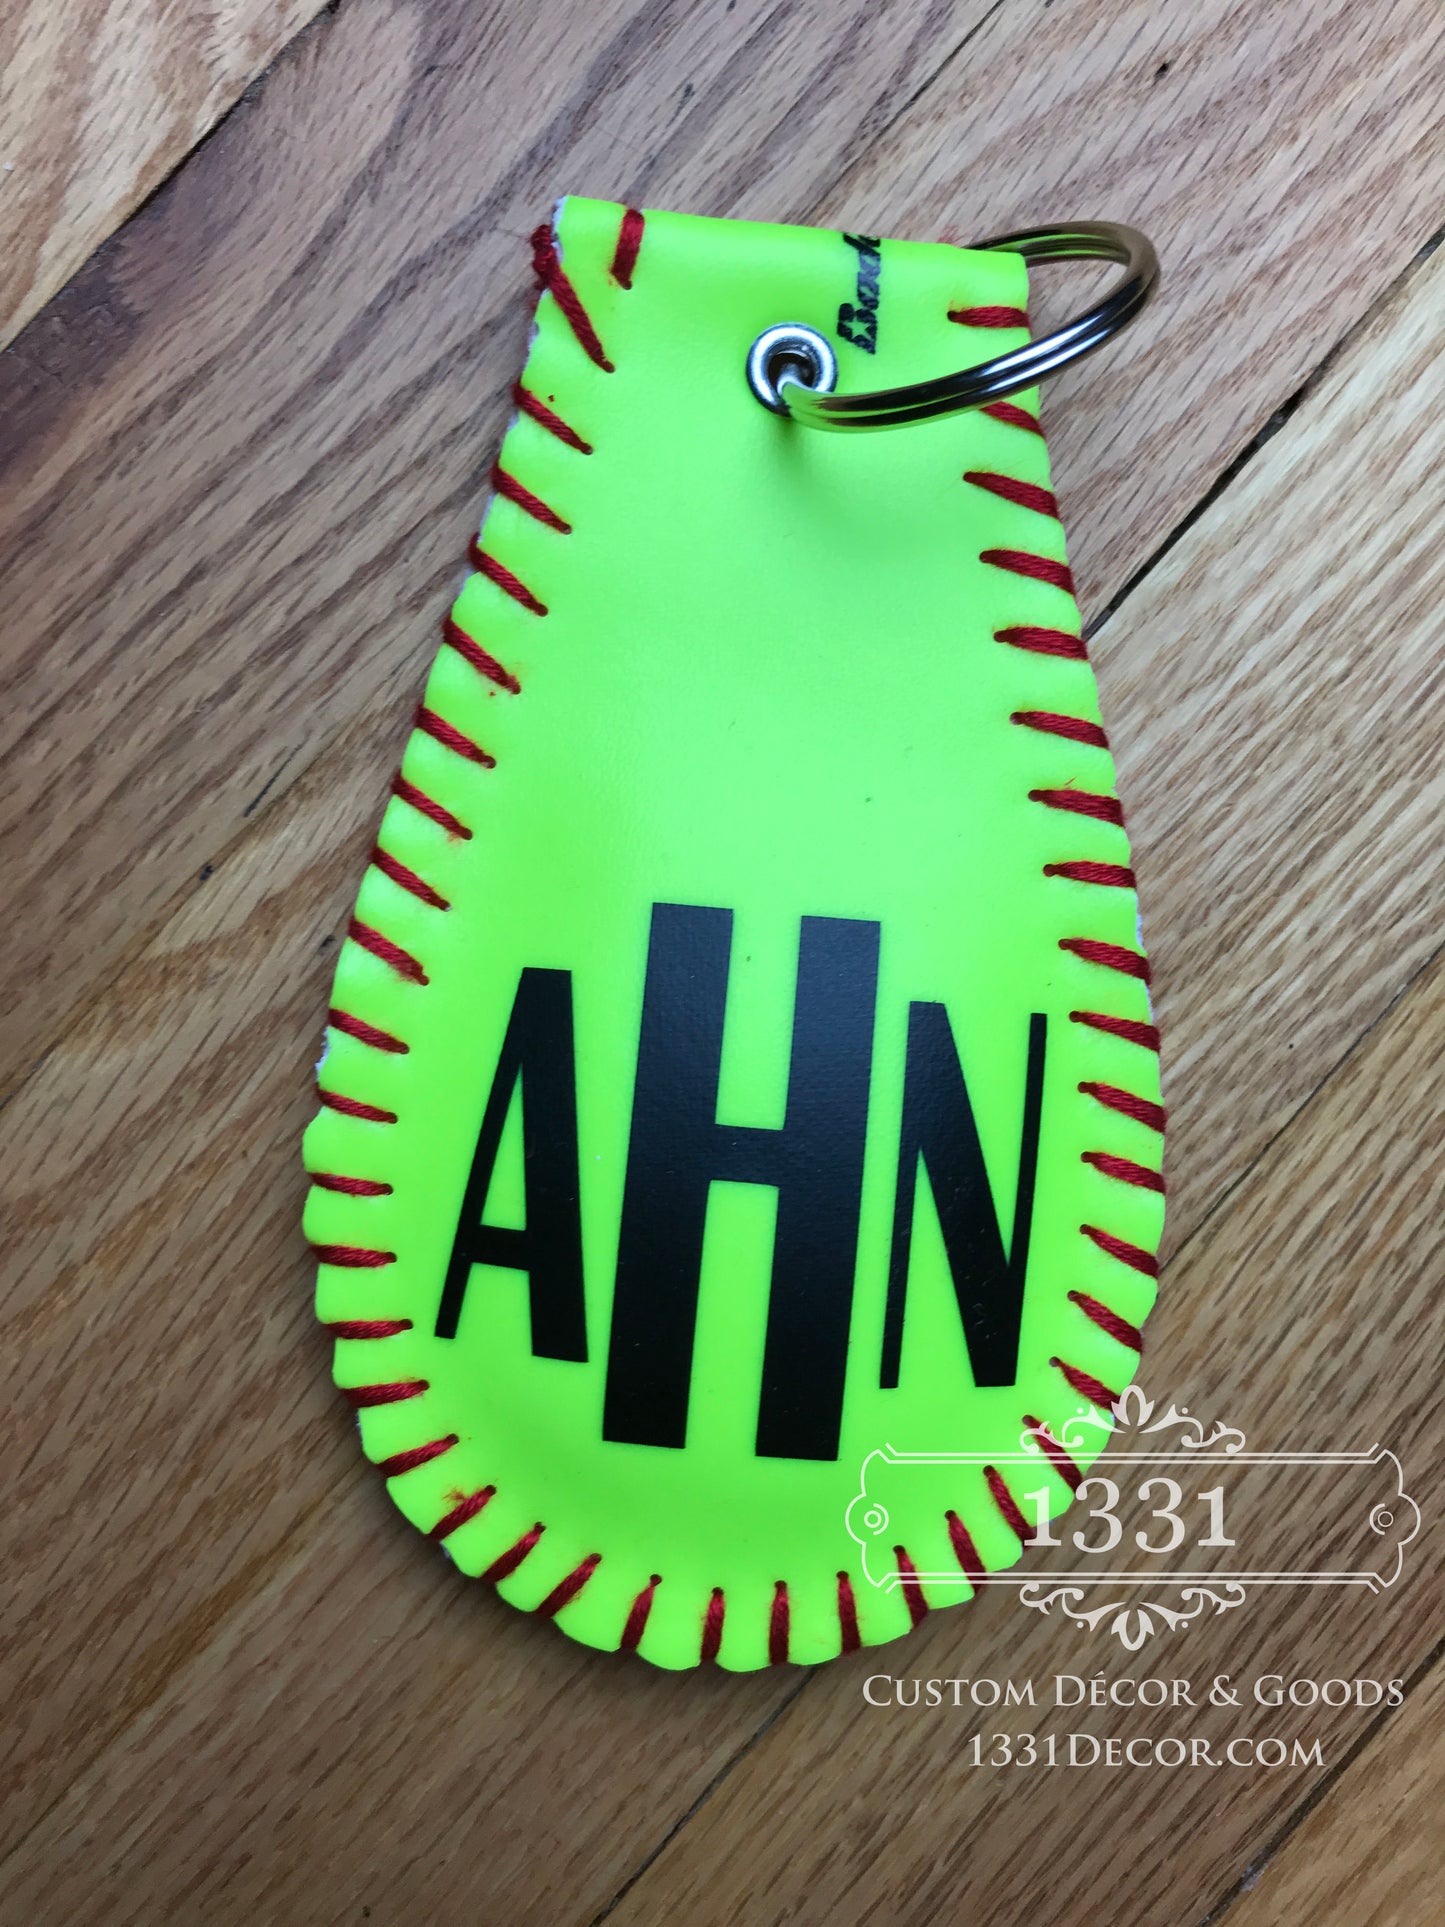 Softball Key Chain, Softball Keychain, Keychain, Key chain, Softball gift, Custom Softball, Coach gift, Softball team gift, Father's Day